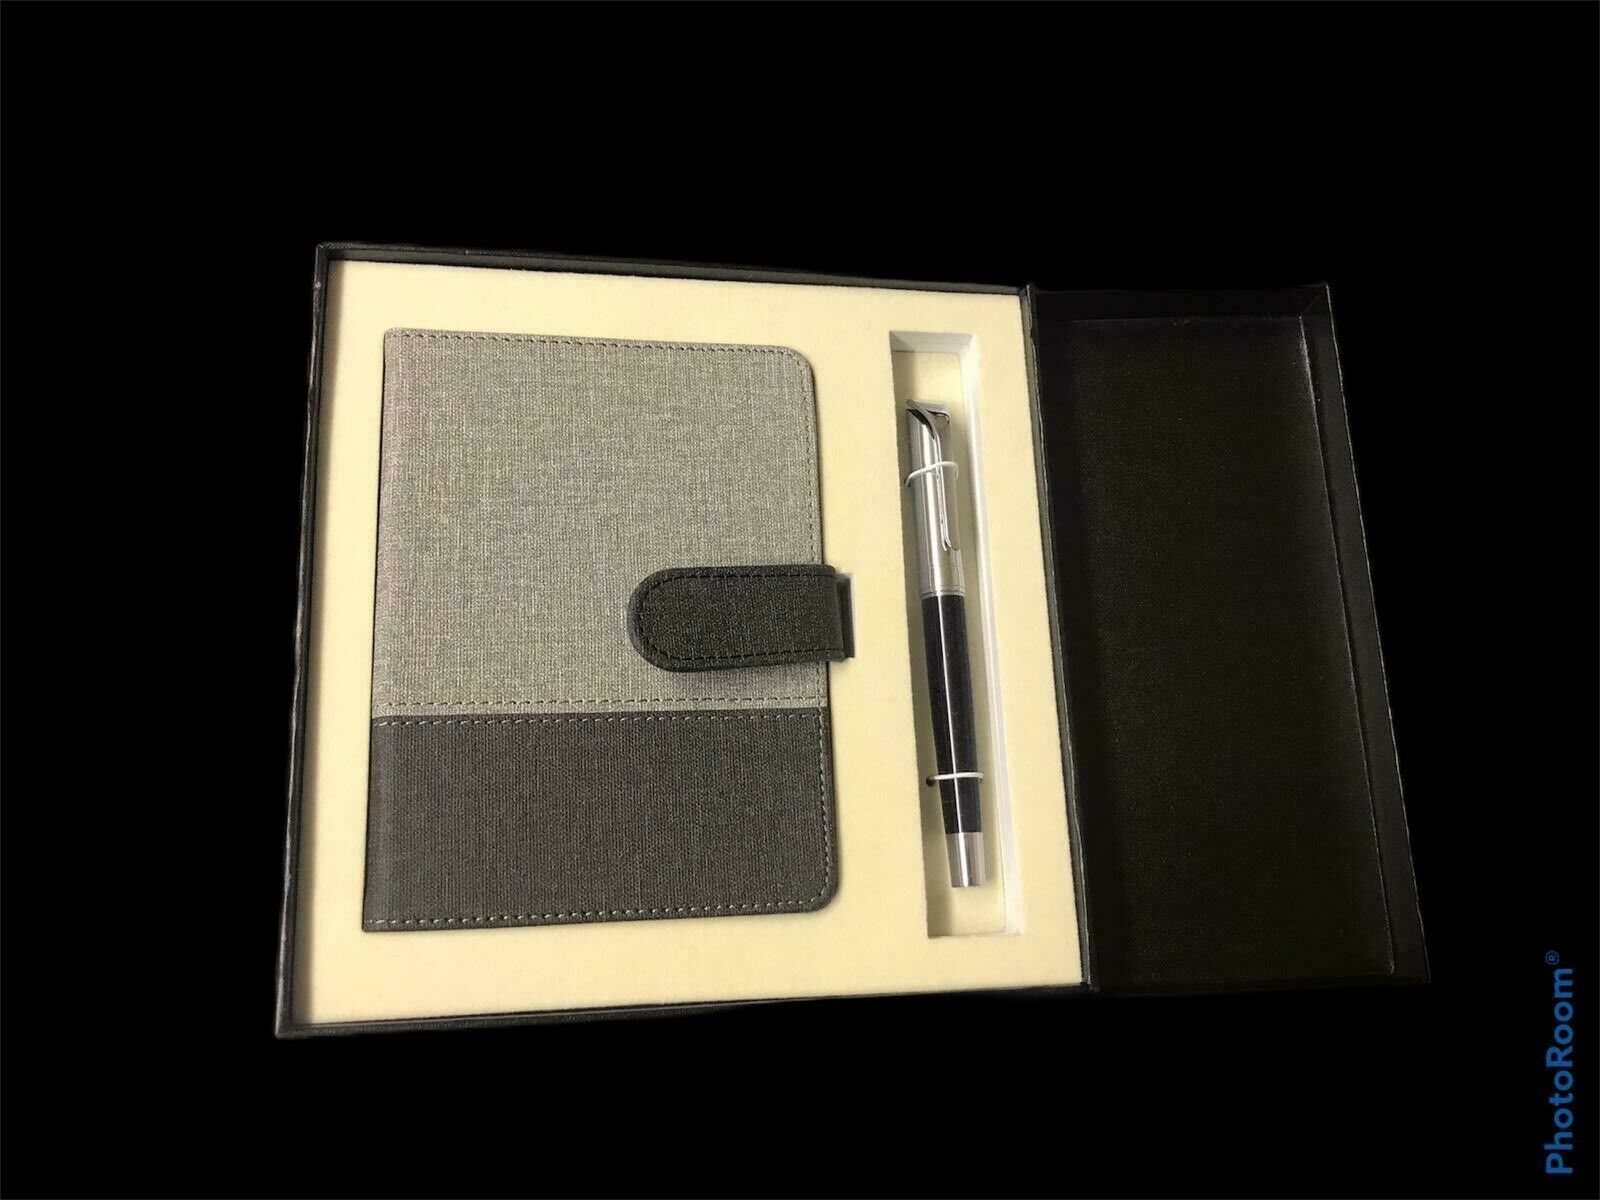 Professional Notepad with Pen Gift Set Business Card Holder Credit Card Holder Gift Set with Notebook and Pen (PN-03)